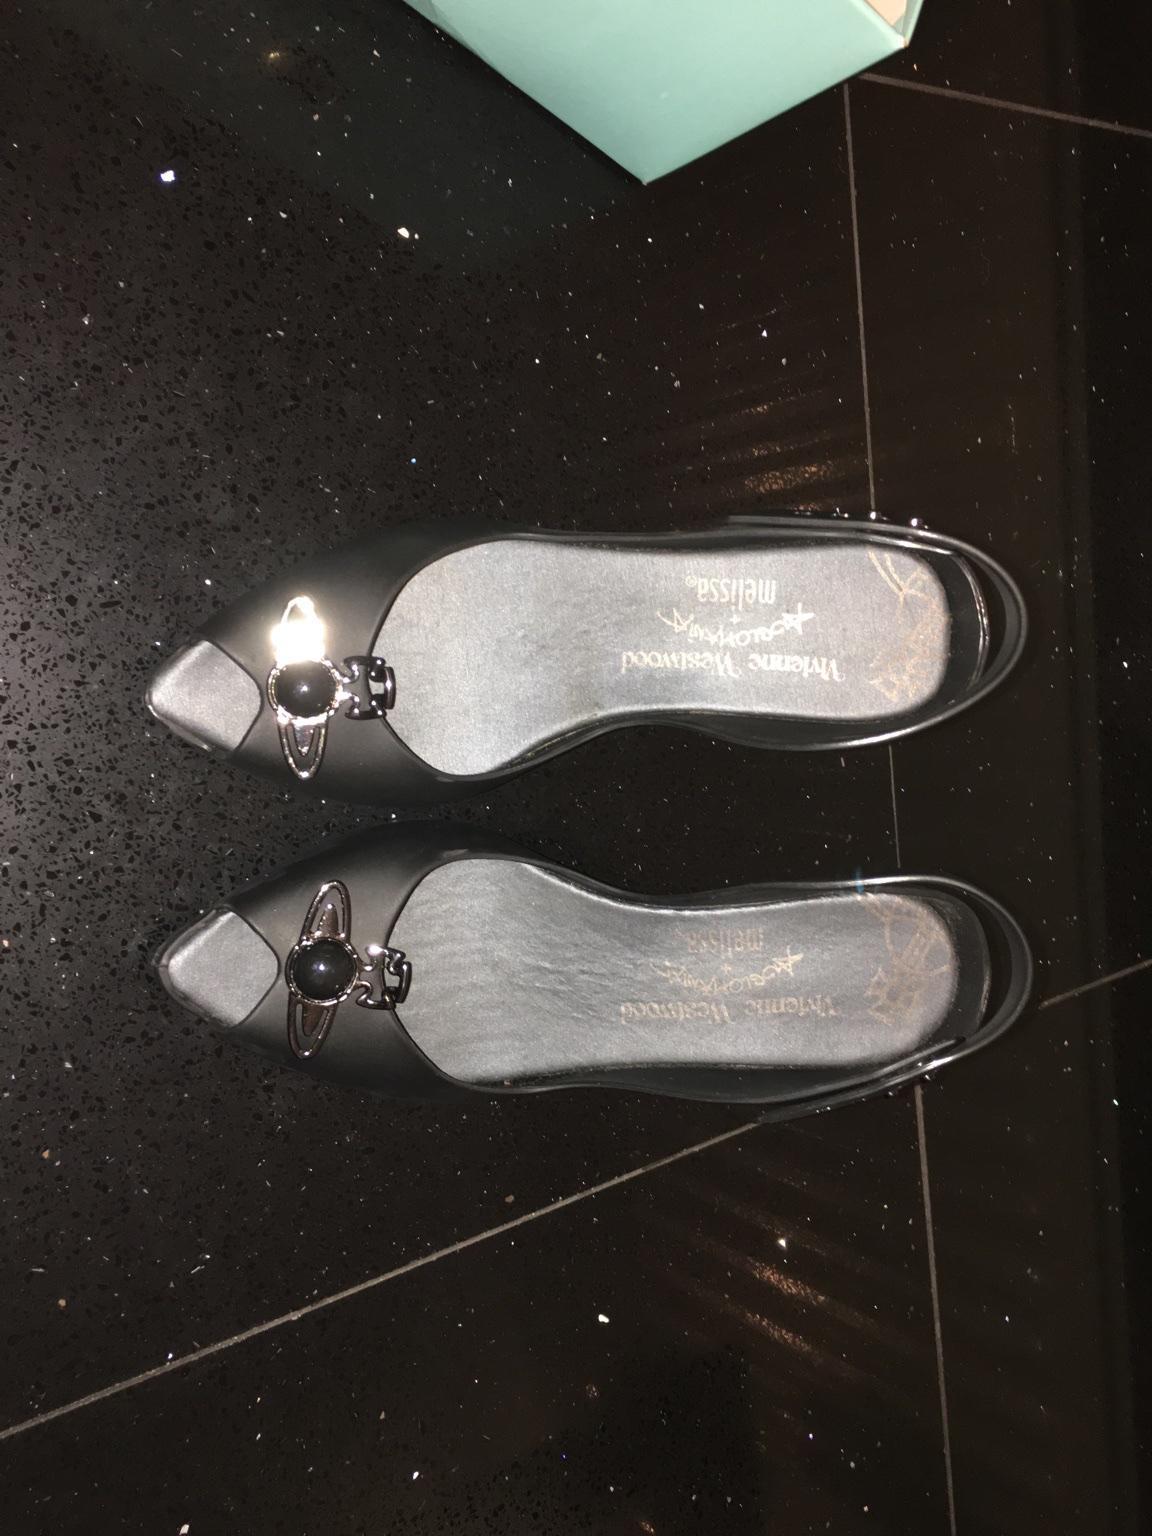 Vivienne Westwood Melia heels in Knowsley for £30.00 for sale | Shpock